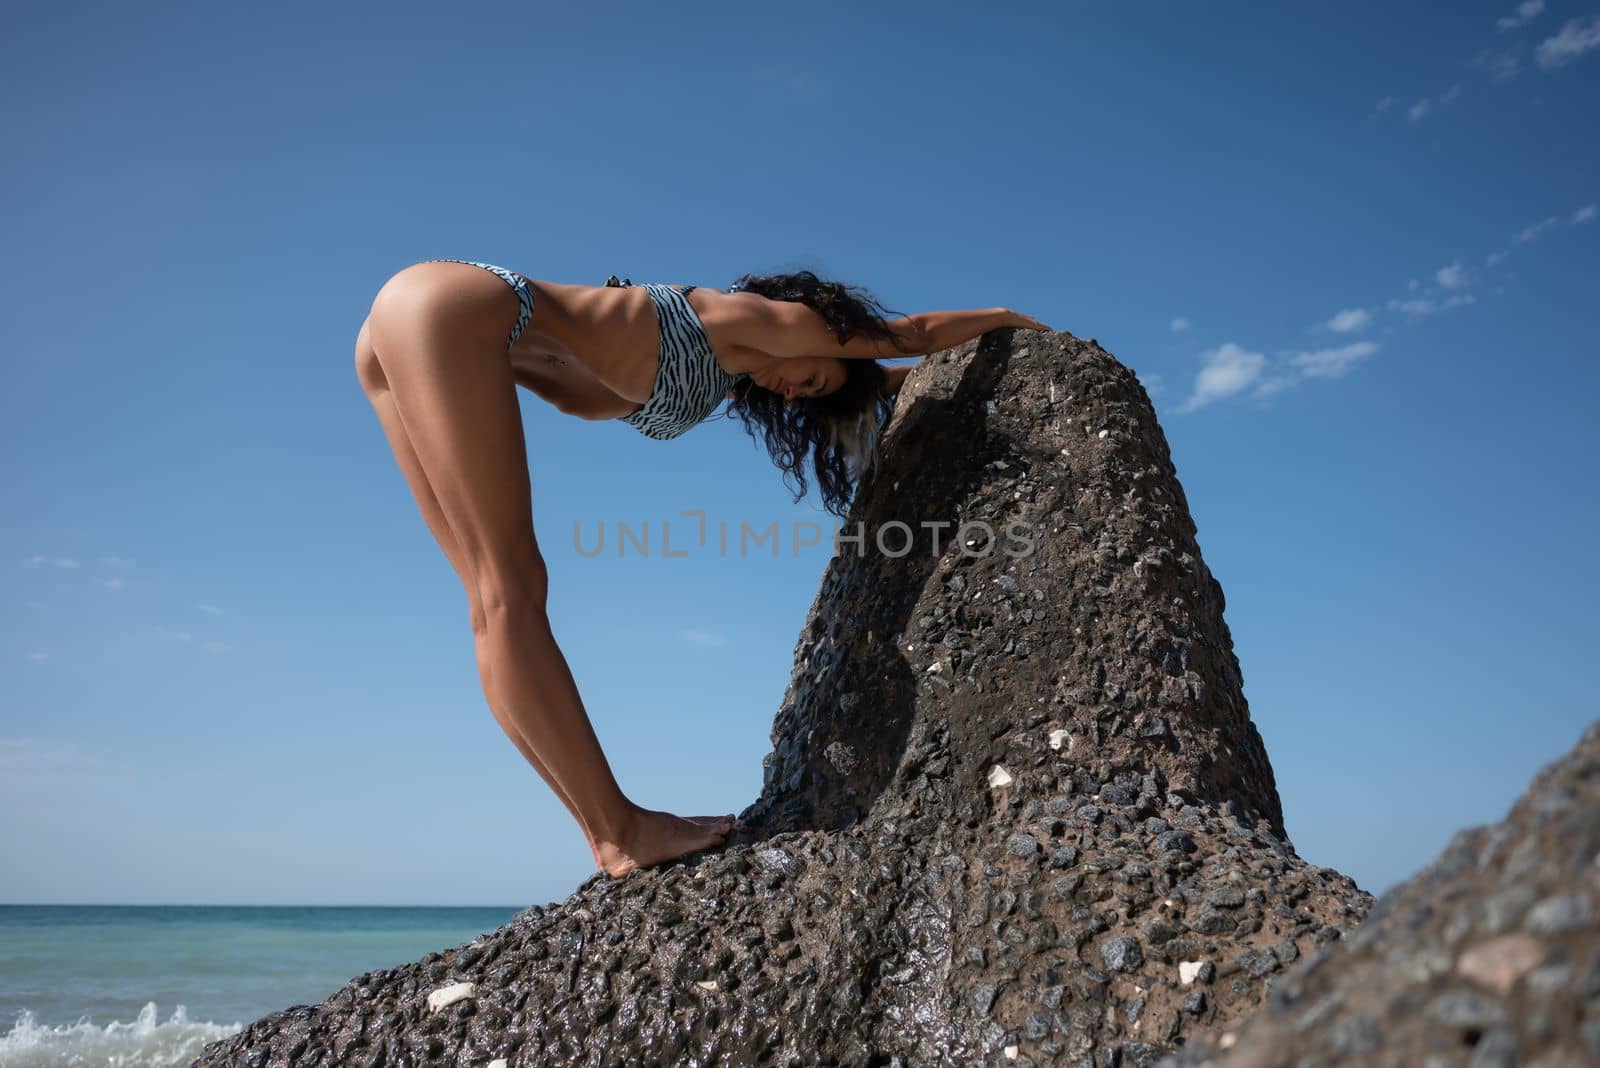 sexy yoga girl in a swimsuit poses slimly on a rock against the background of the sea by Rotozey